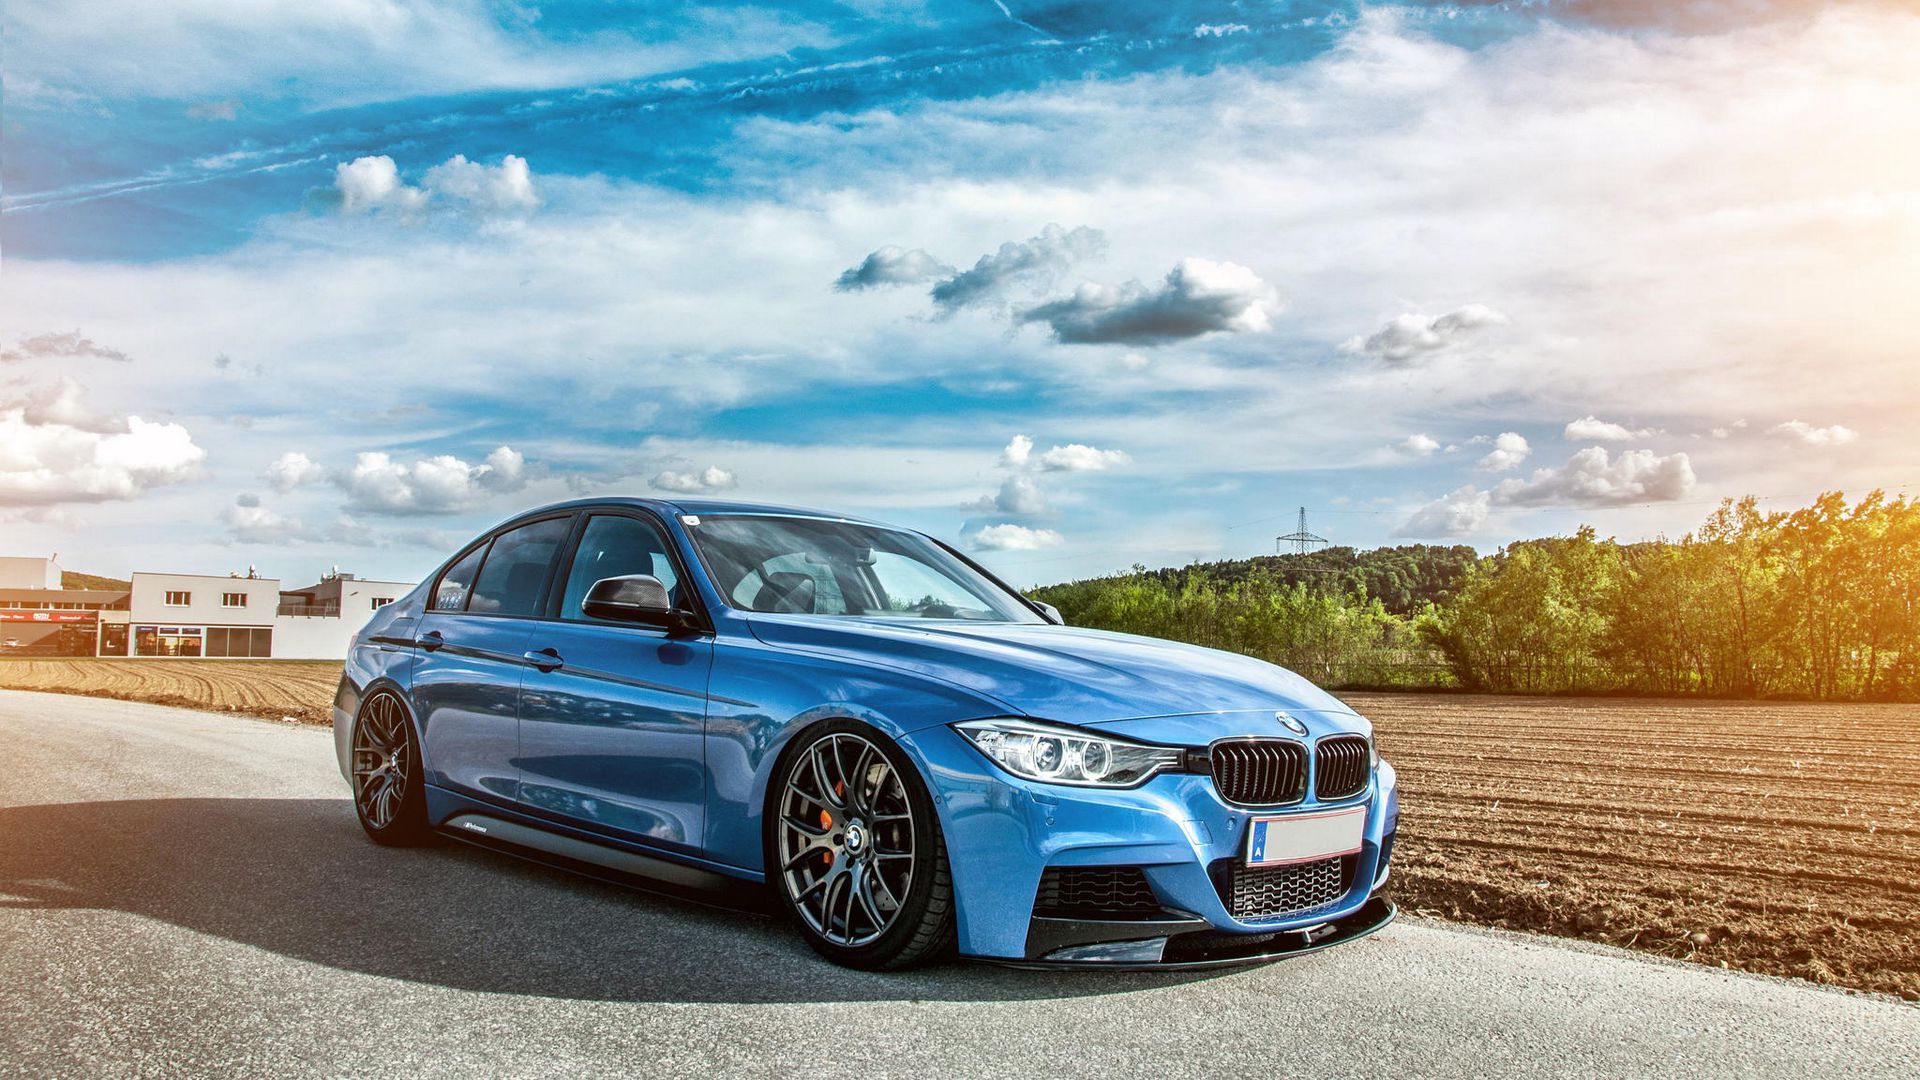 Download wallpaper 1920x1080 bmw, f 335i, tuning, stance full hd, hdtv, fhd, 1080p HD background